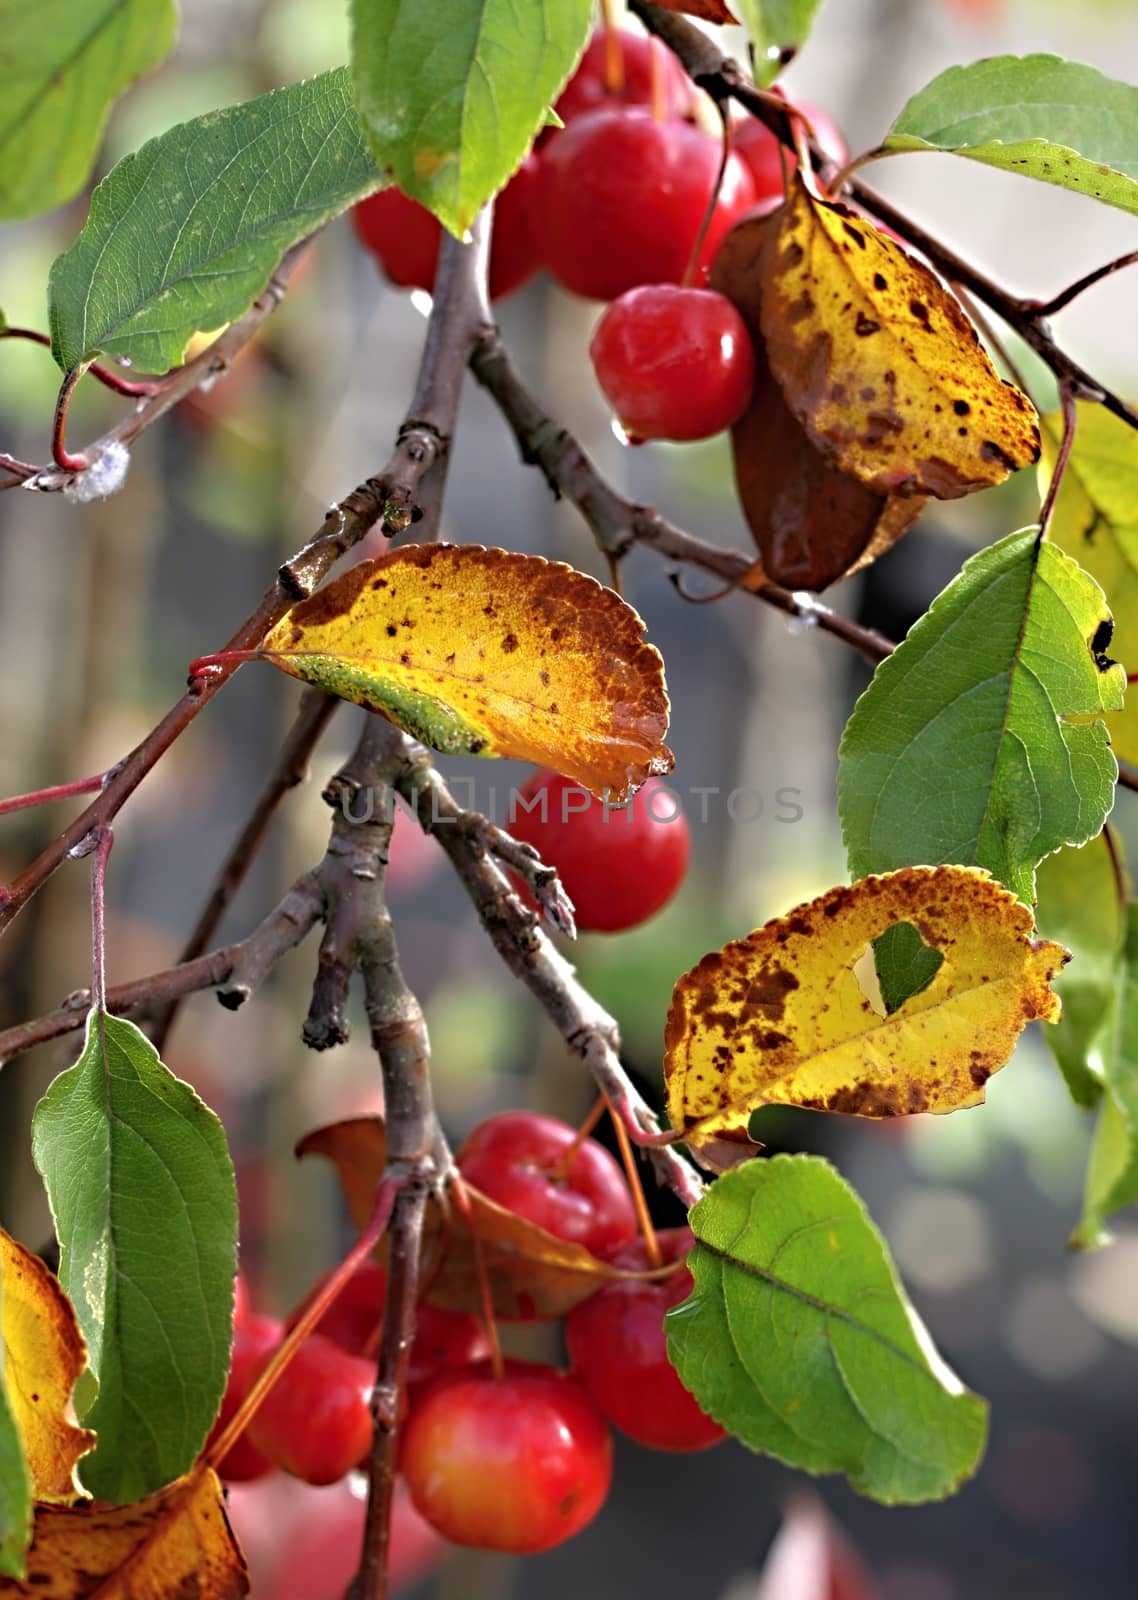 Decorative small apples on the tree with leaves